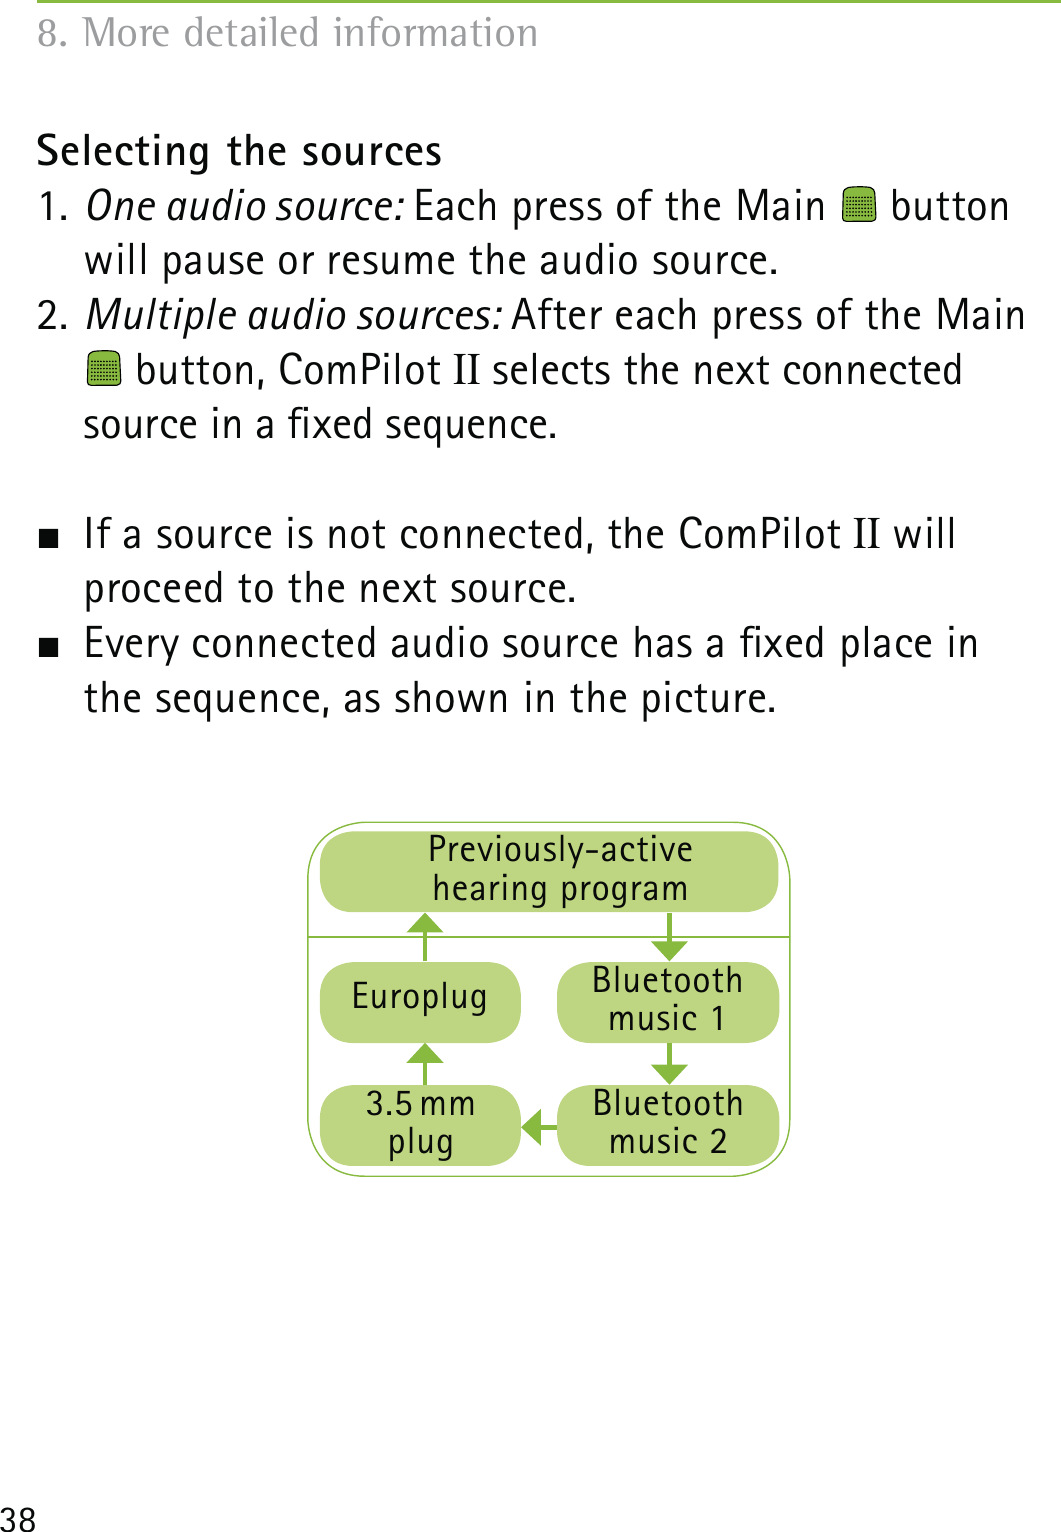 38Selecting the sources1. One audio source: Each press of the Main   button will pause or resume the audio source.2. Multiple audio sources: After each press of the Main   button, ComPilot II selects the next connected source in a xed sequence.  If a source is not connected, the ComPilot II will  proceed to the next source.  Every connected audio source has a xed place in  the sequence, as shown in the picture.8. More detailed informationPreviously-active hearing programEuroplug3.5 mmplugBluetooth music 1Bluetooth music 2